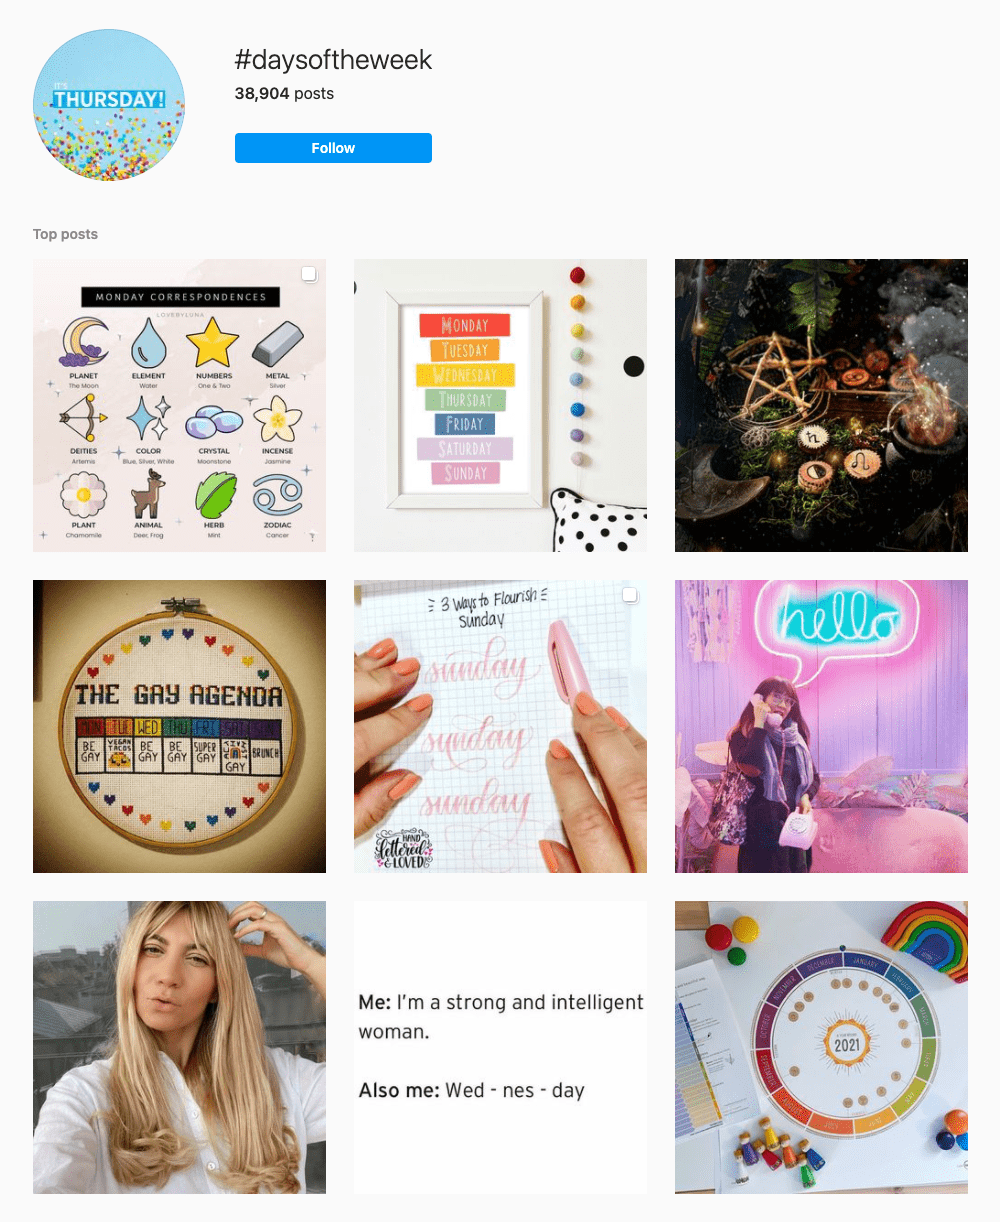 Instagram explore page for the hashtag #daysoftheweek.